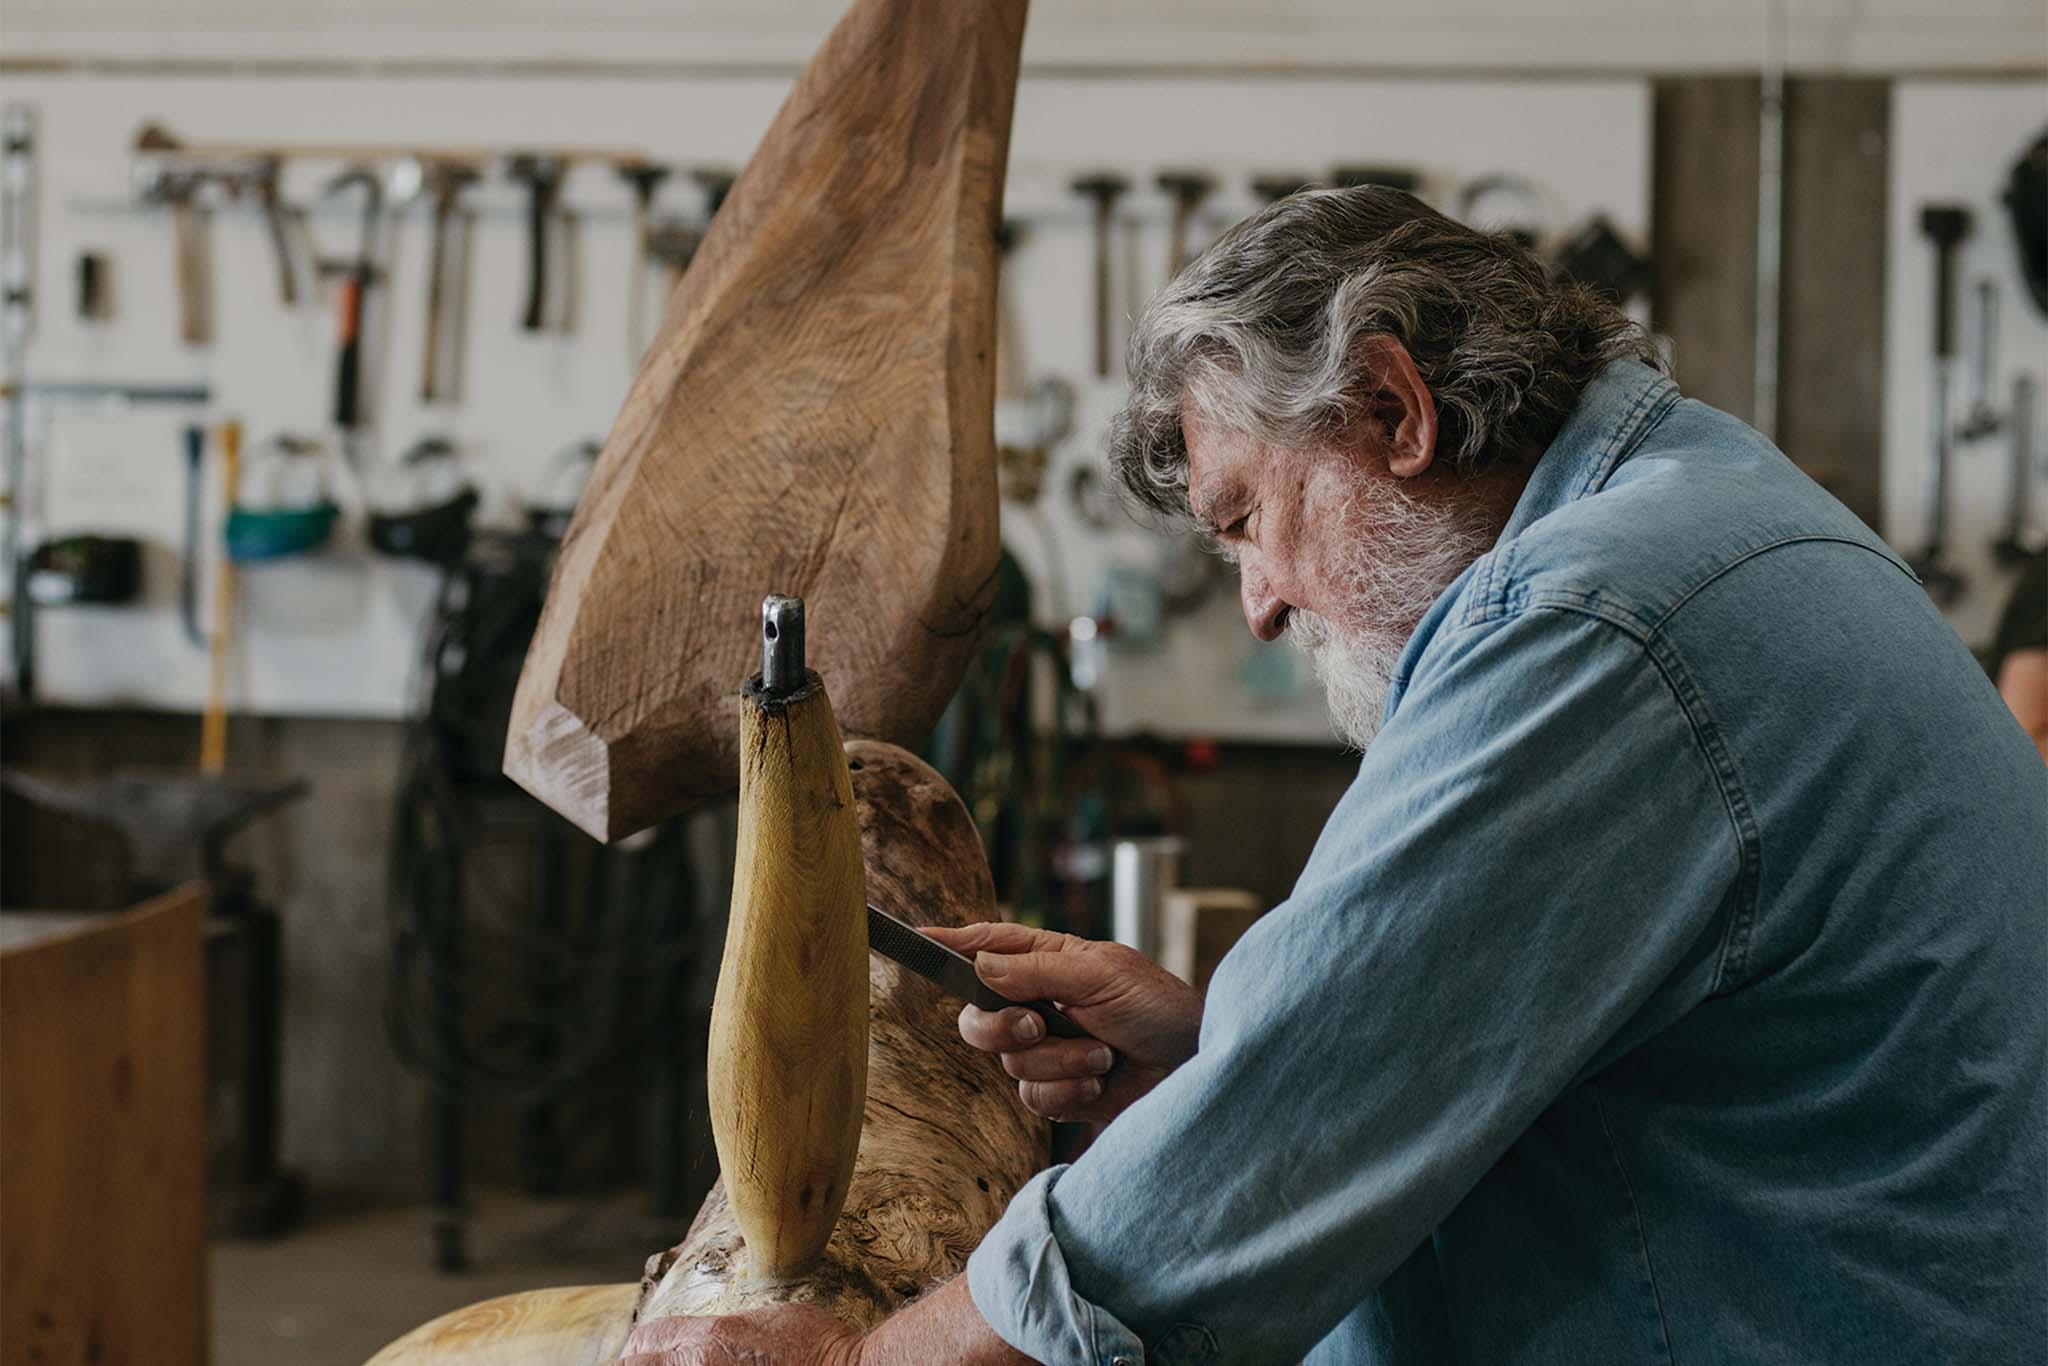 a person (James Surls) carving a piece of wood